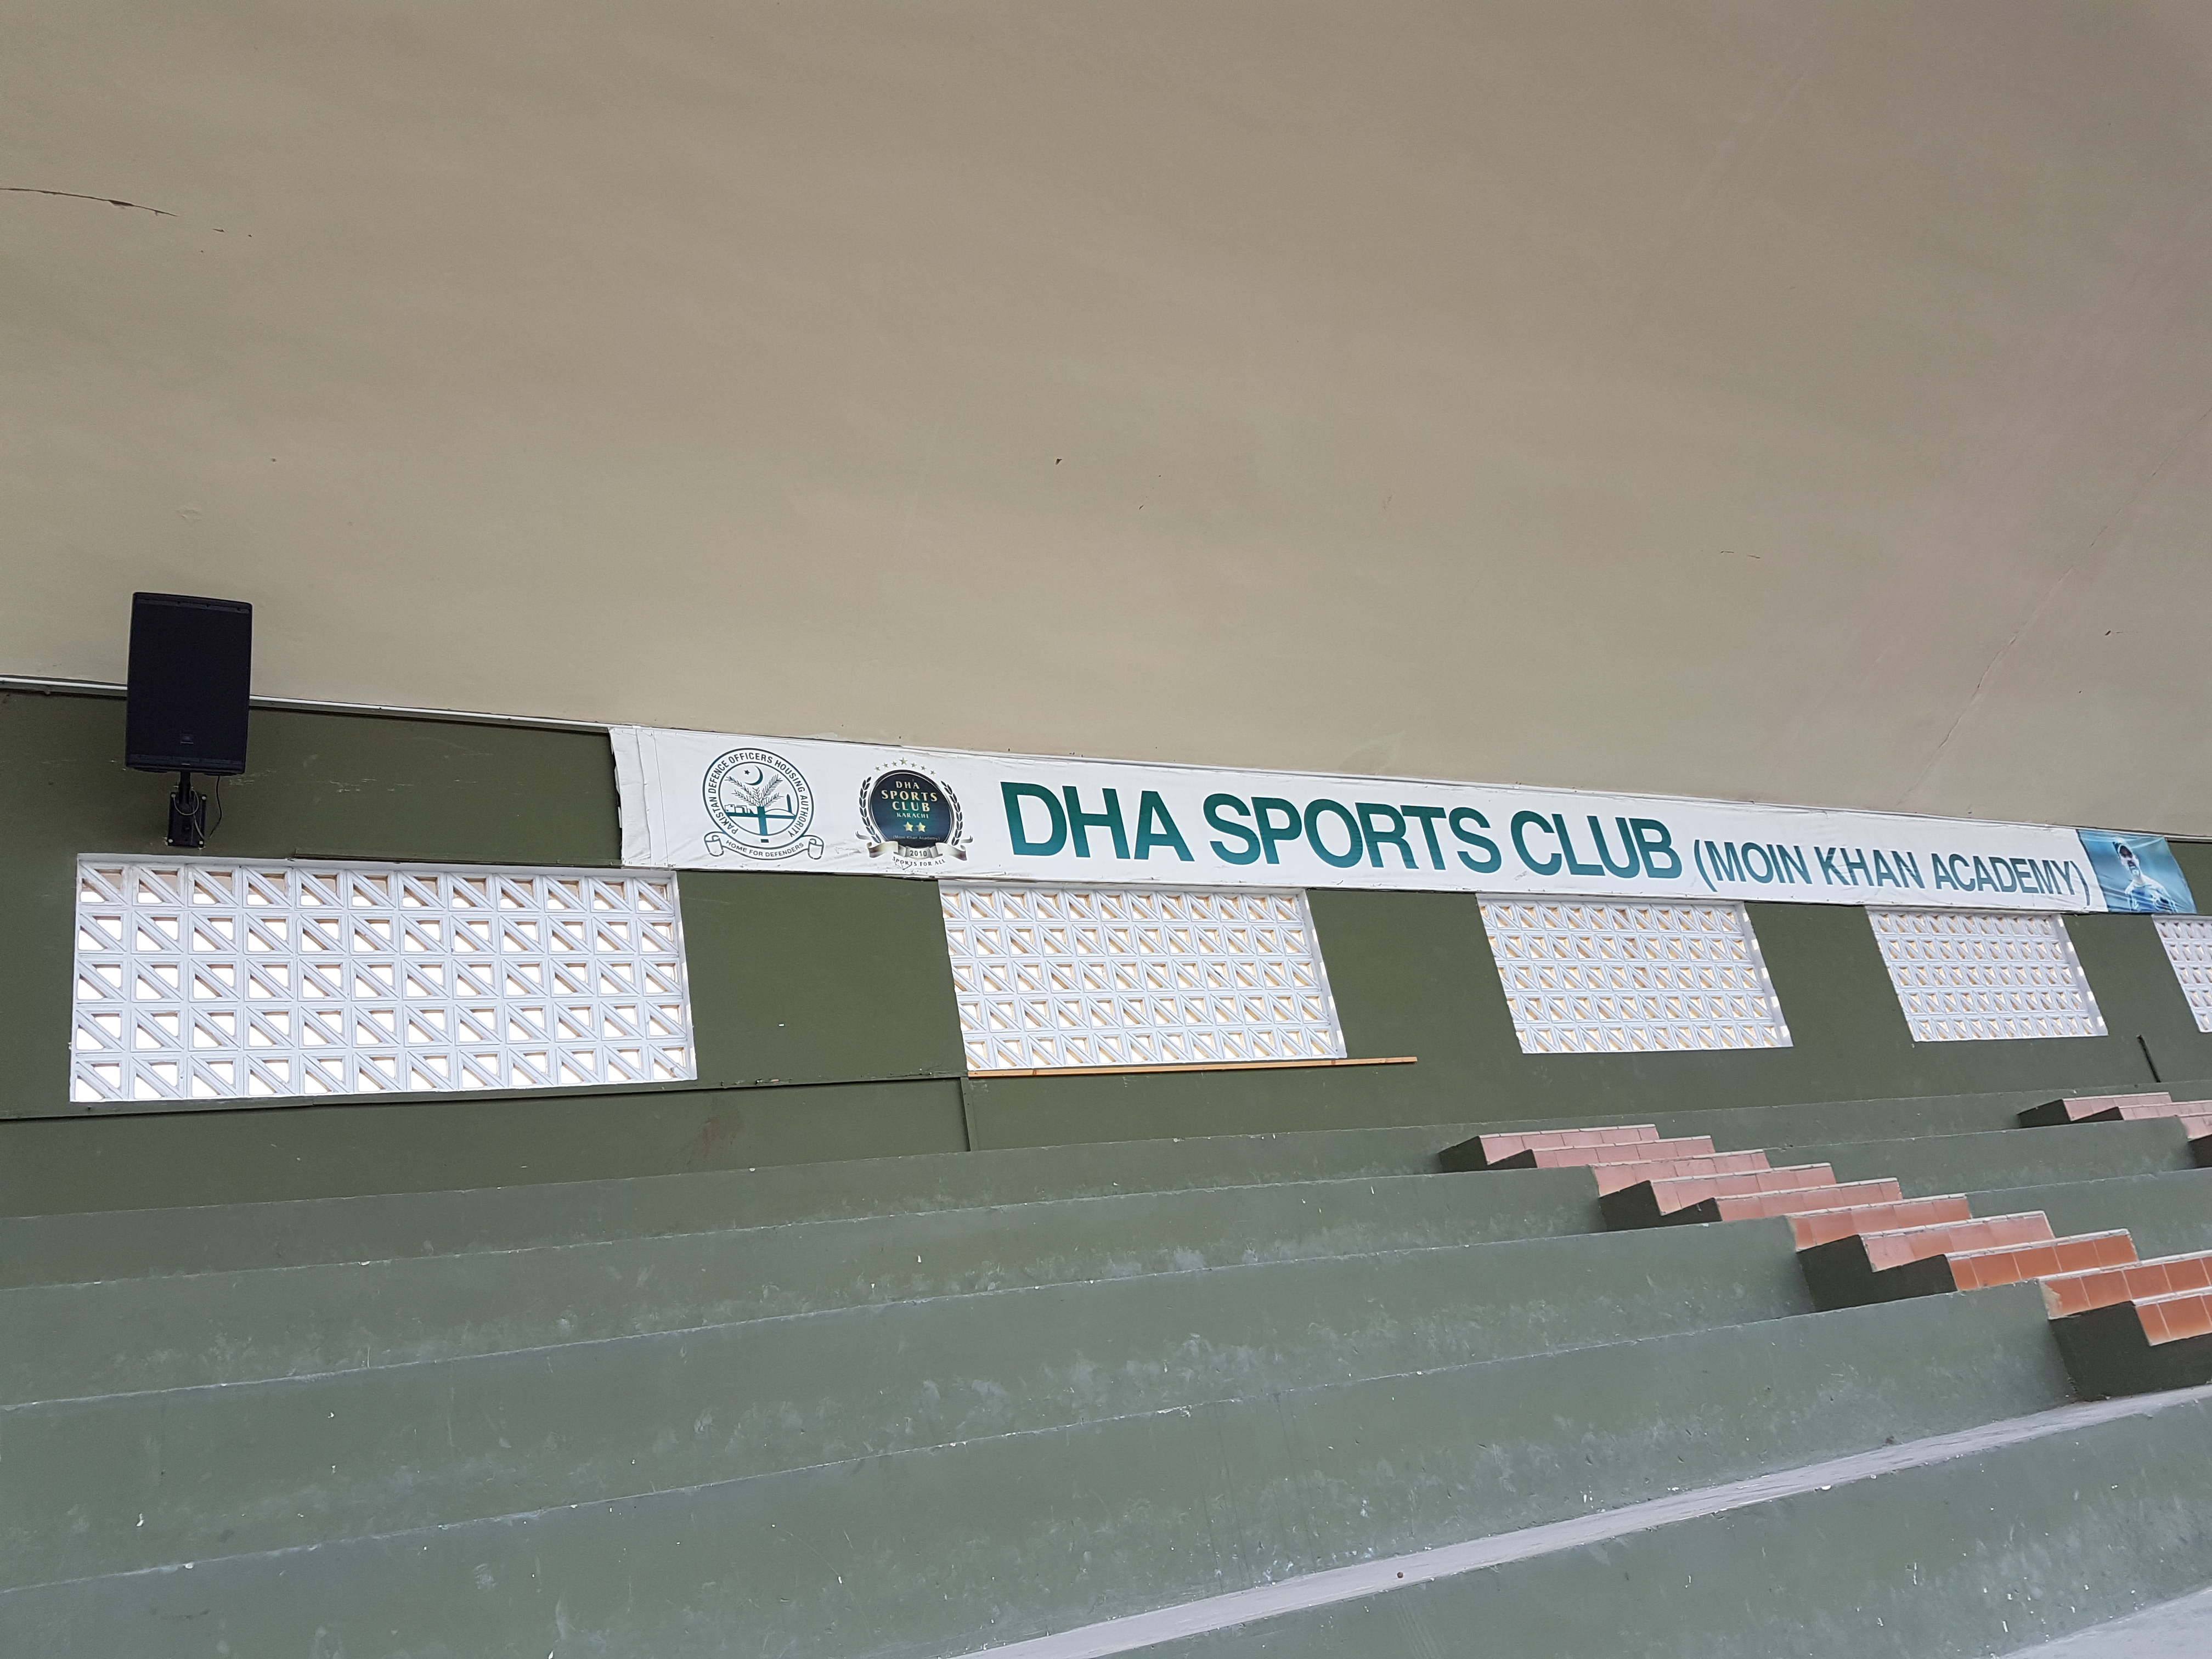 DHA Sports Club Revamps its Stadium Audio System with HARMAN Professional Solutions